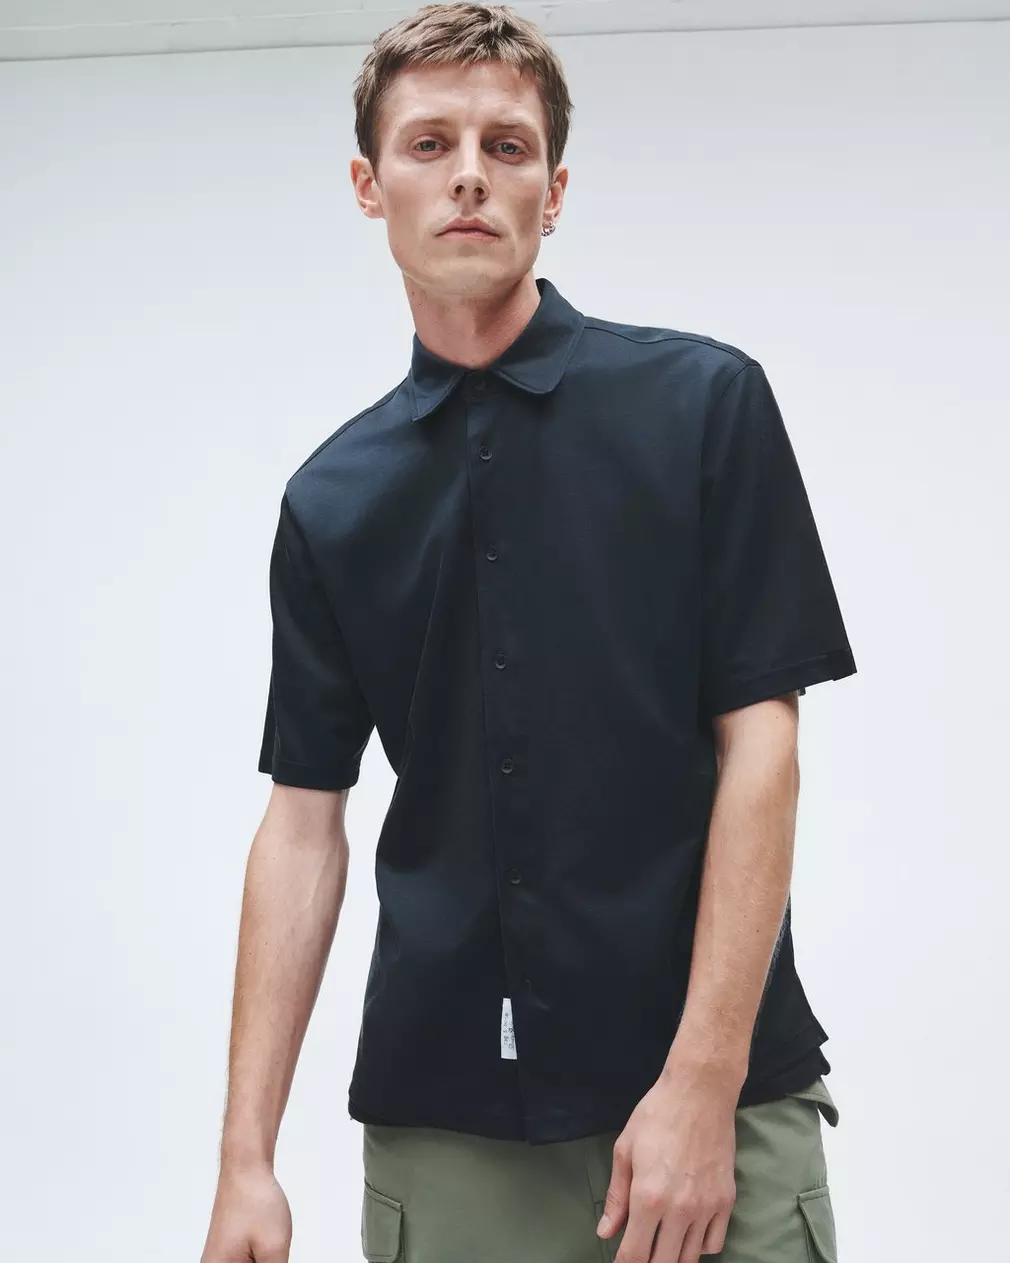 Dalton Knit Cupro Shirt Relaxed Fit Button Down